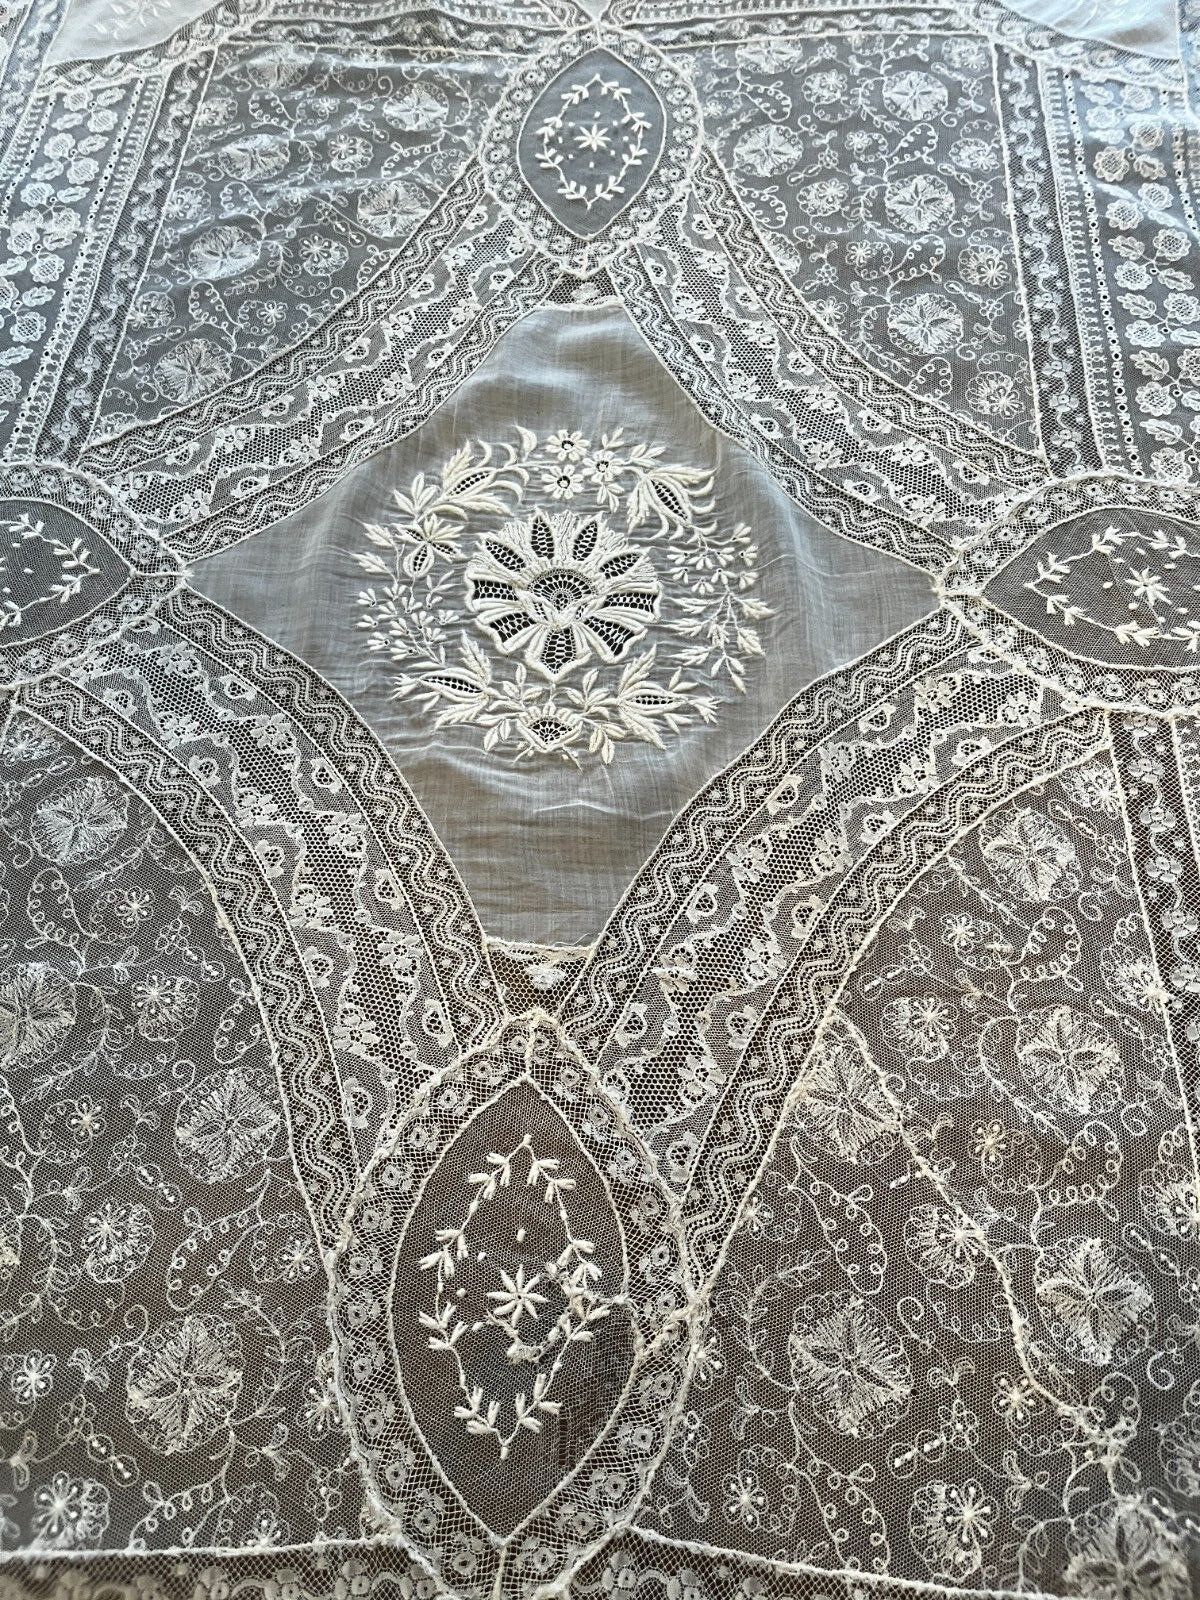 Antique Vintage Lace- FRENCH NORMANDY LACE TABLE TOPPER - CRIB COVERLET